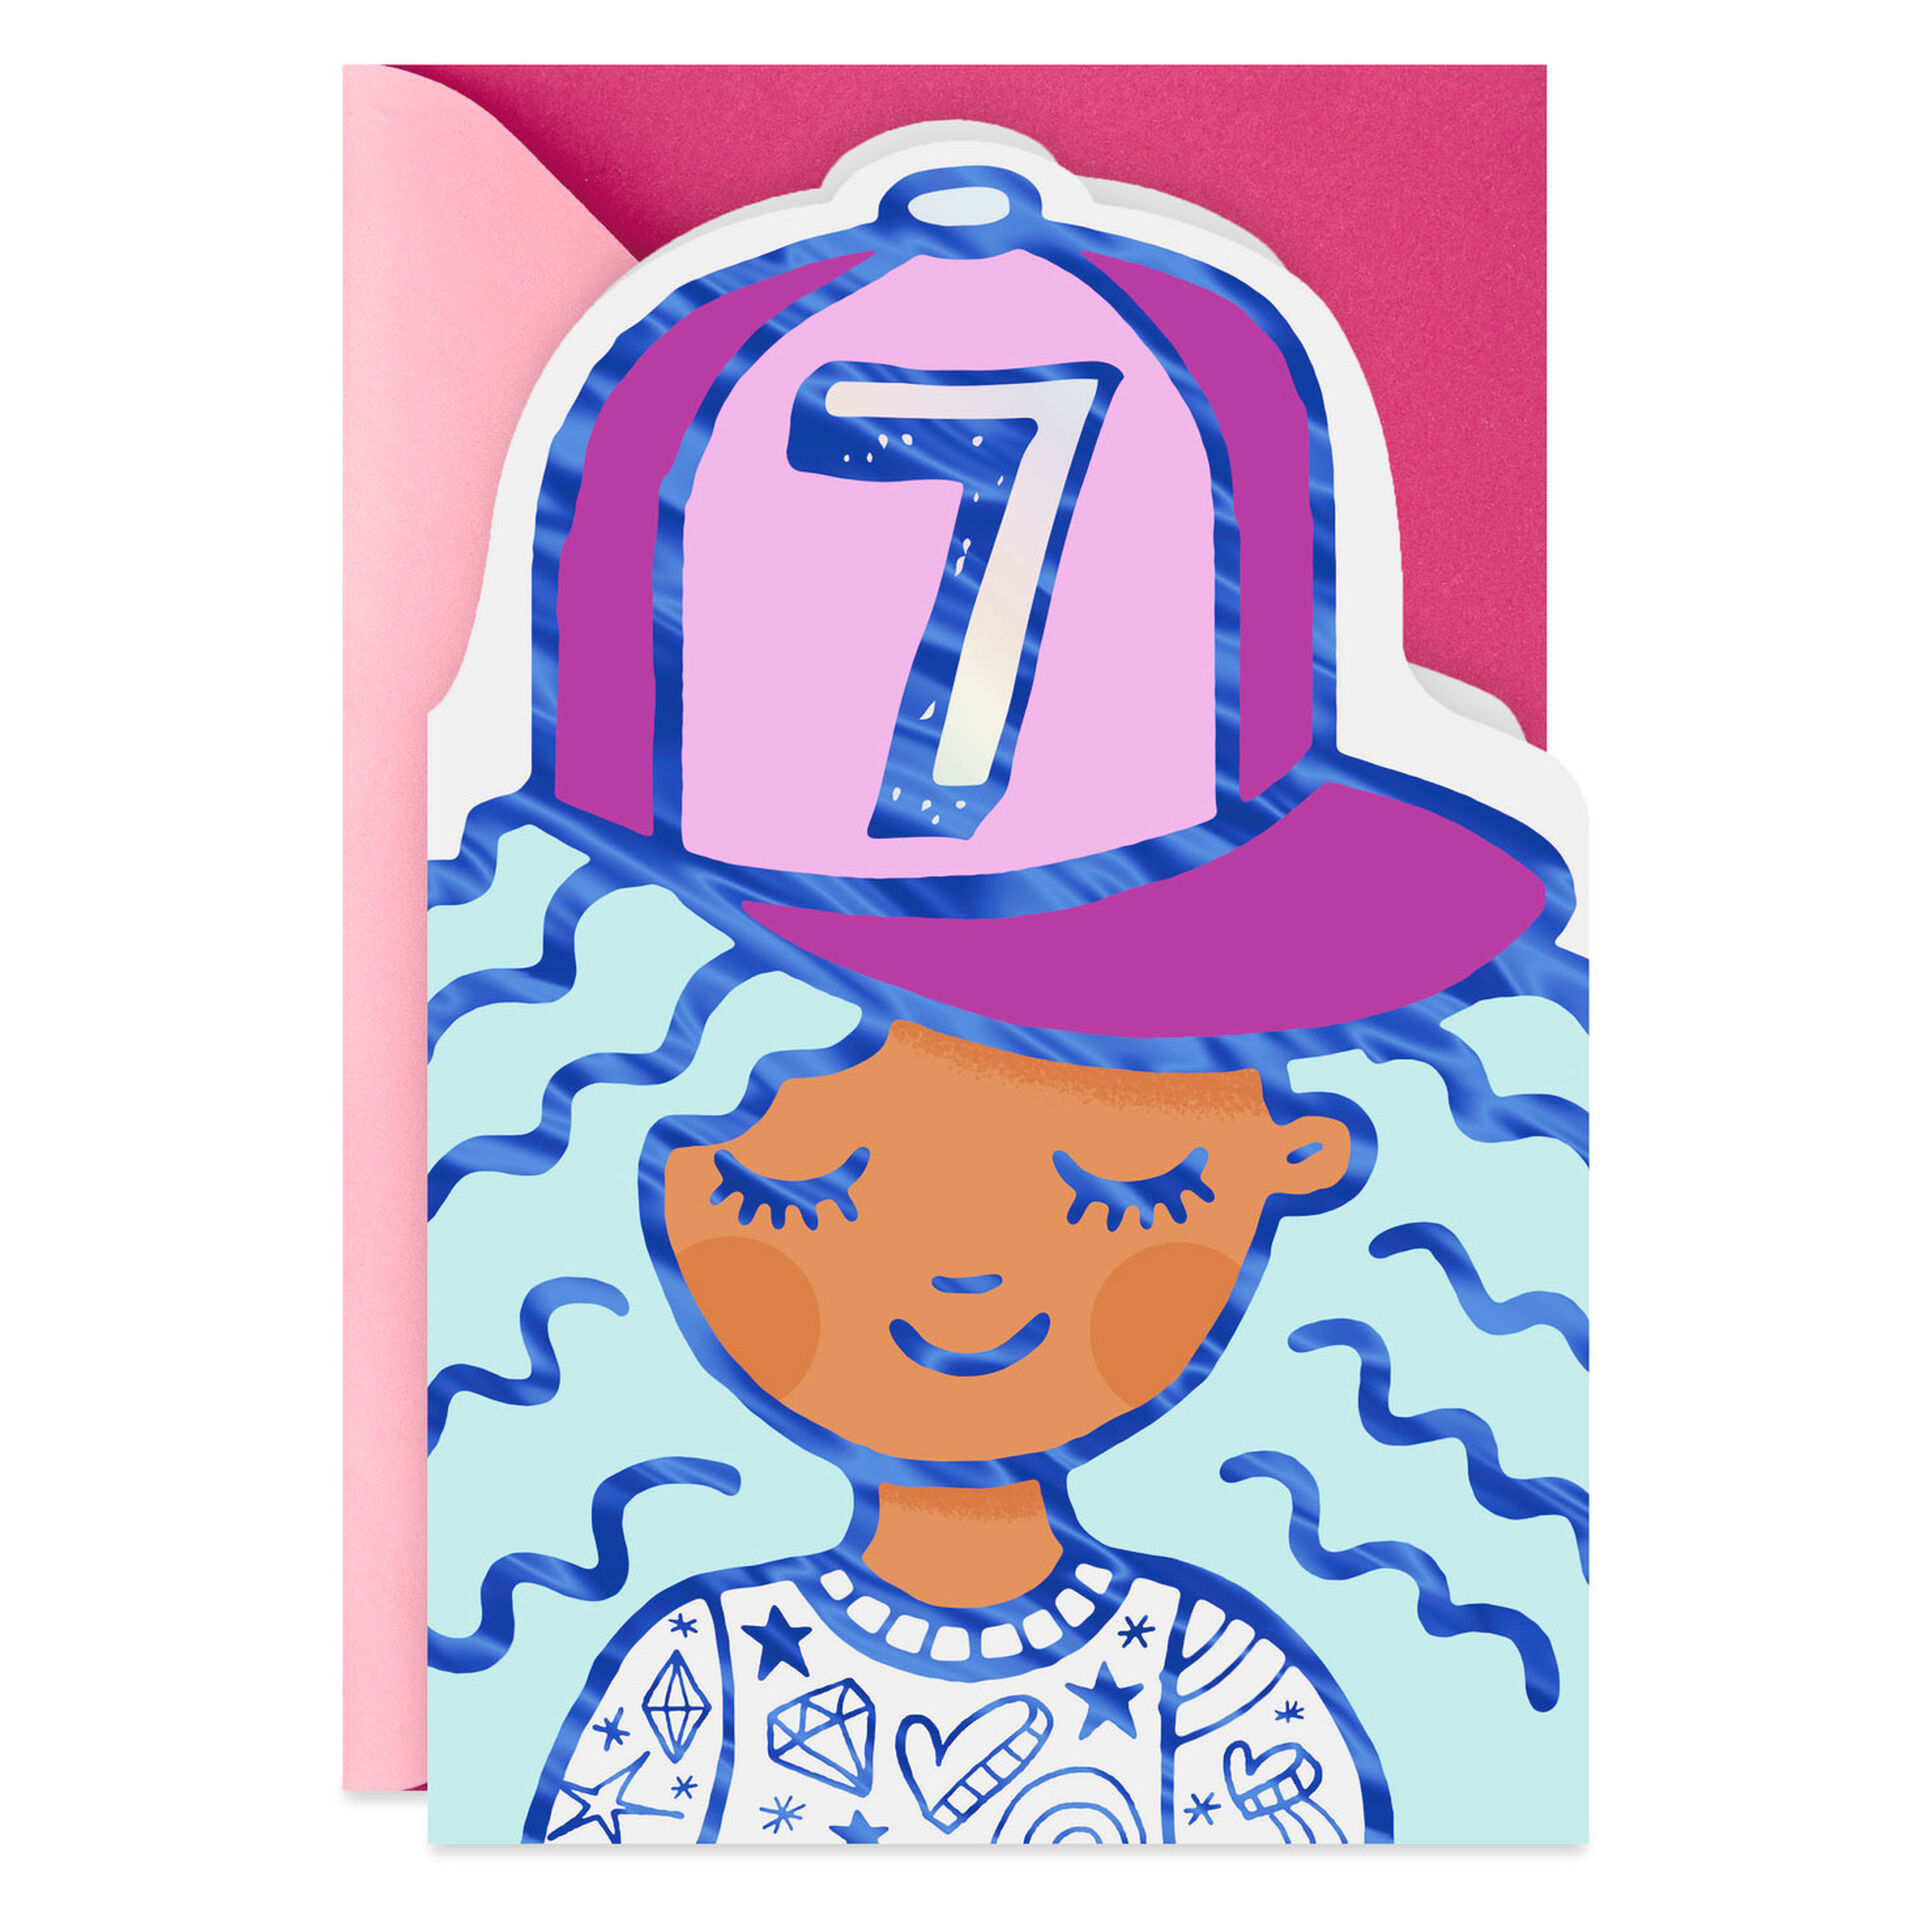 Youre-Super-Fun-7th-Birthday-Card-for-Girl_399HKB5832_01